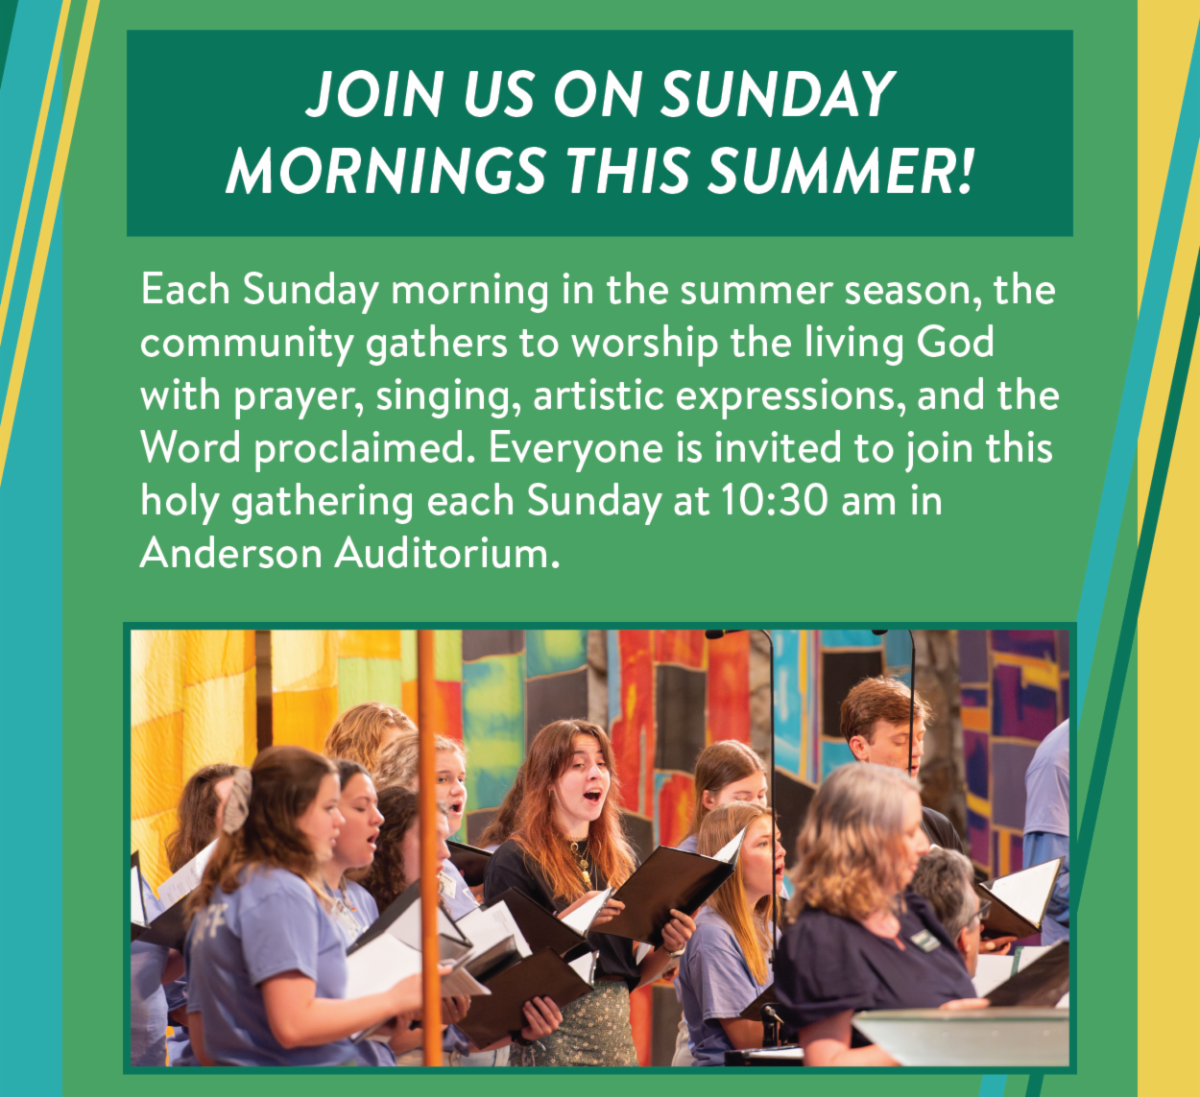 Join us on Sunday mornings this summer! - Each Sunday morning in the summer season, the community gathers to worship the living God with prayer, singing, artistic expressions, and the Word proclaimed. Everyone is invited to join this holy gathering each Sunday at 10:30 am in Anderson Auditorium.